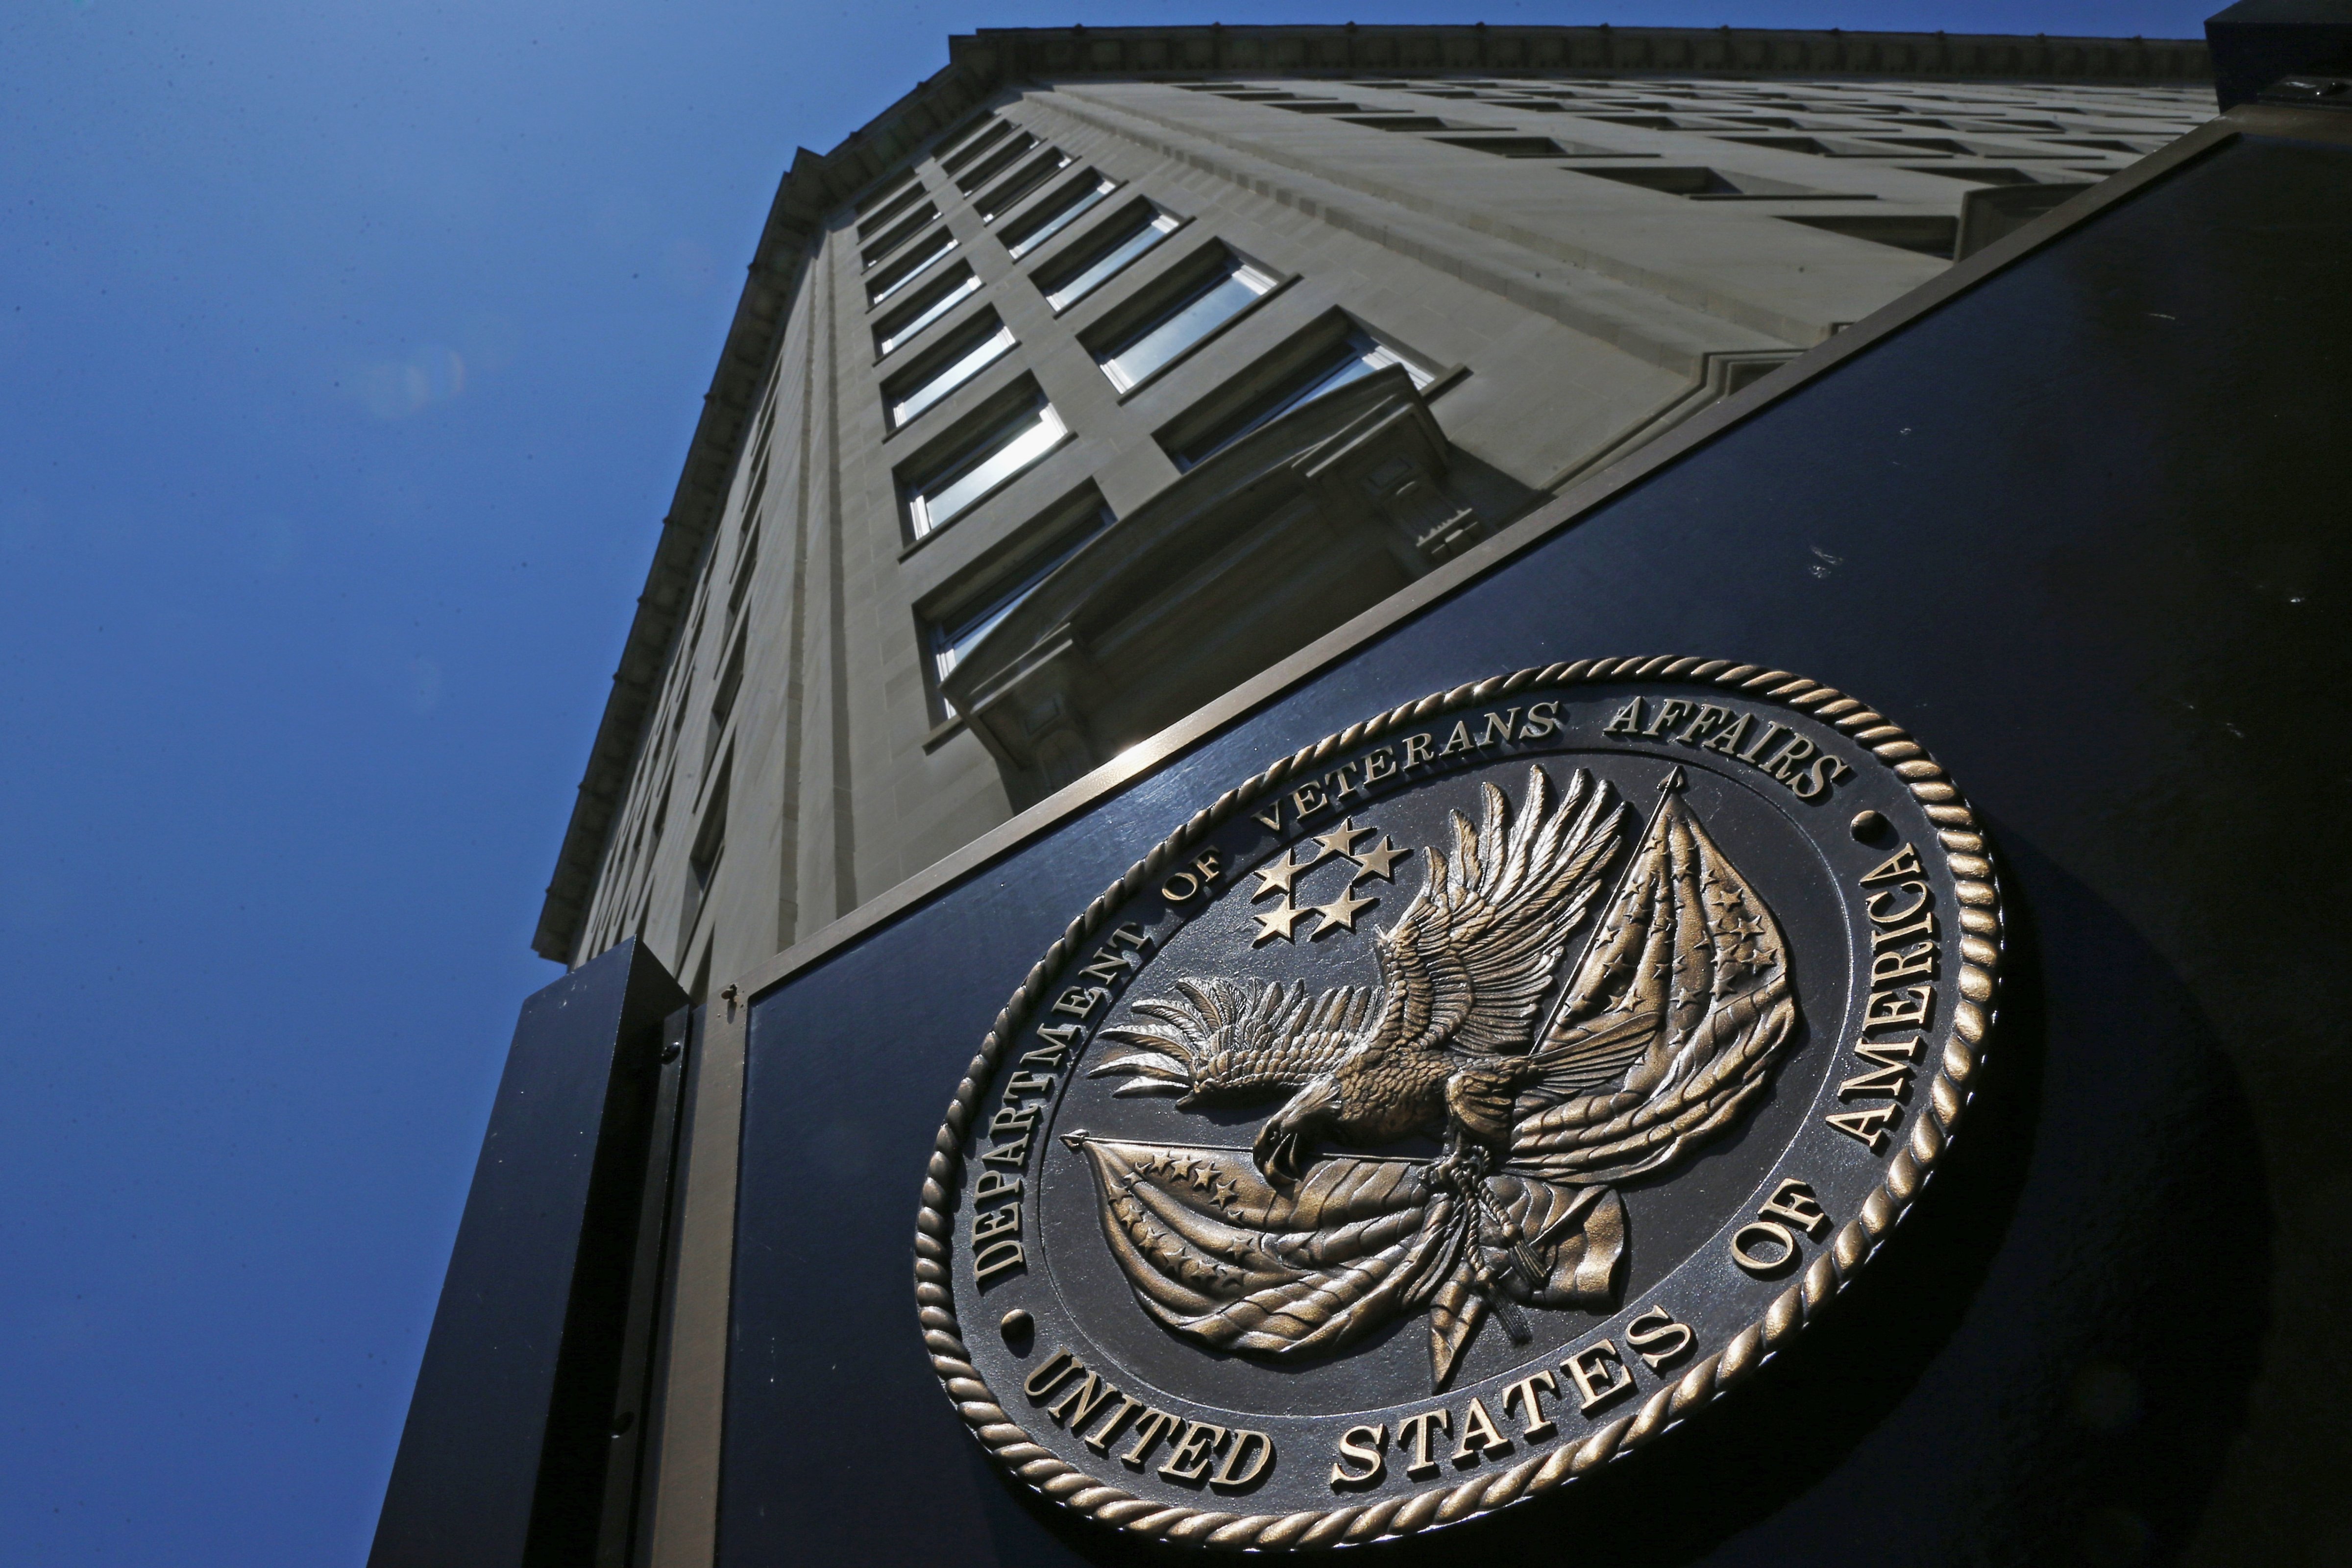 The seal affixed to the front of the Department of Veterans Affairs building in Washington on June 21, 2013. 